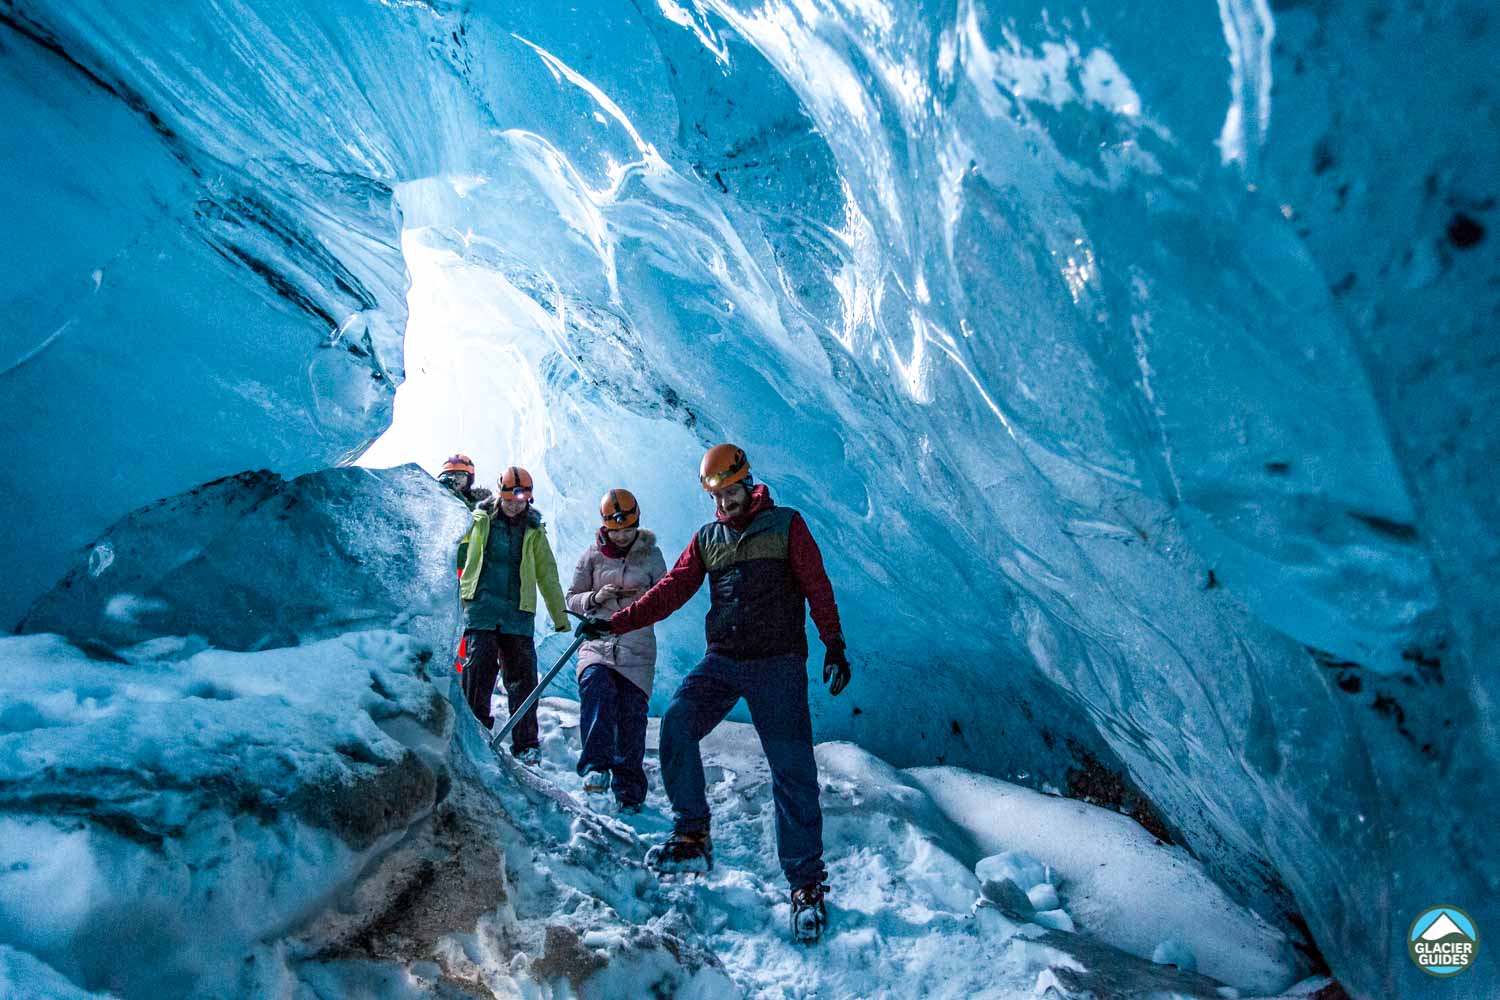 Group Exploring Ice Cave Climbing Down